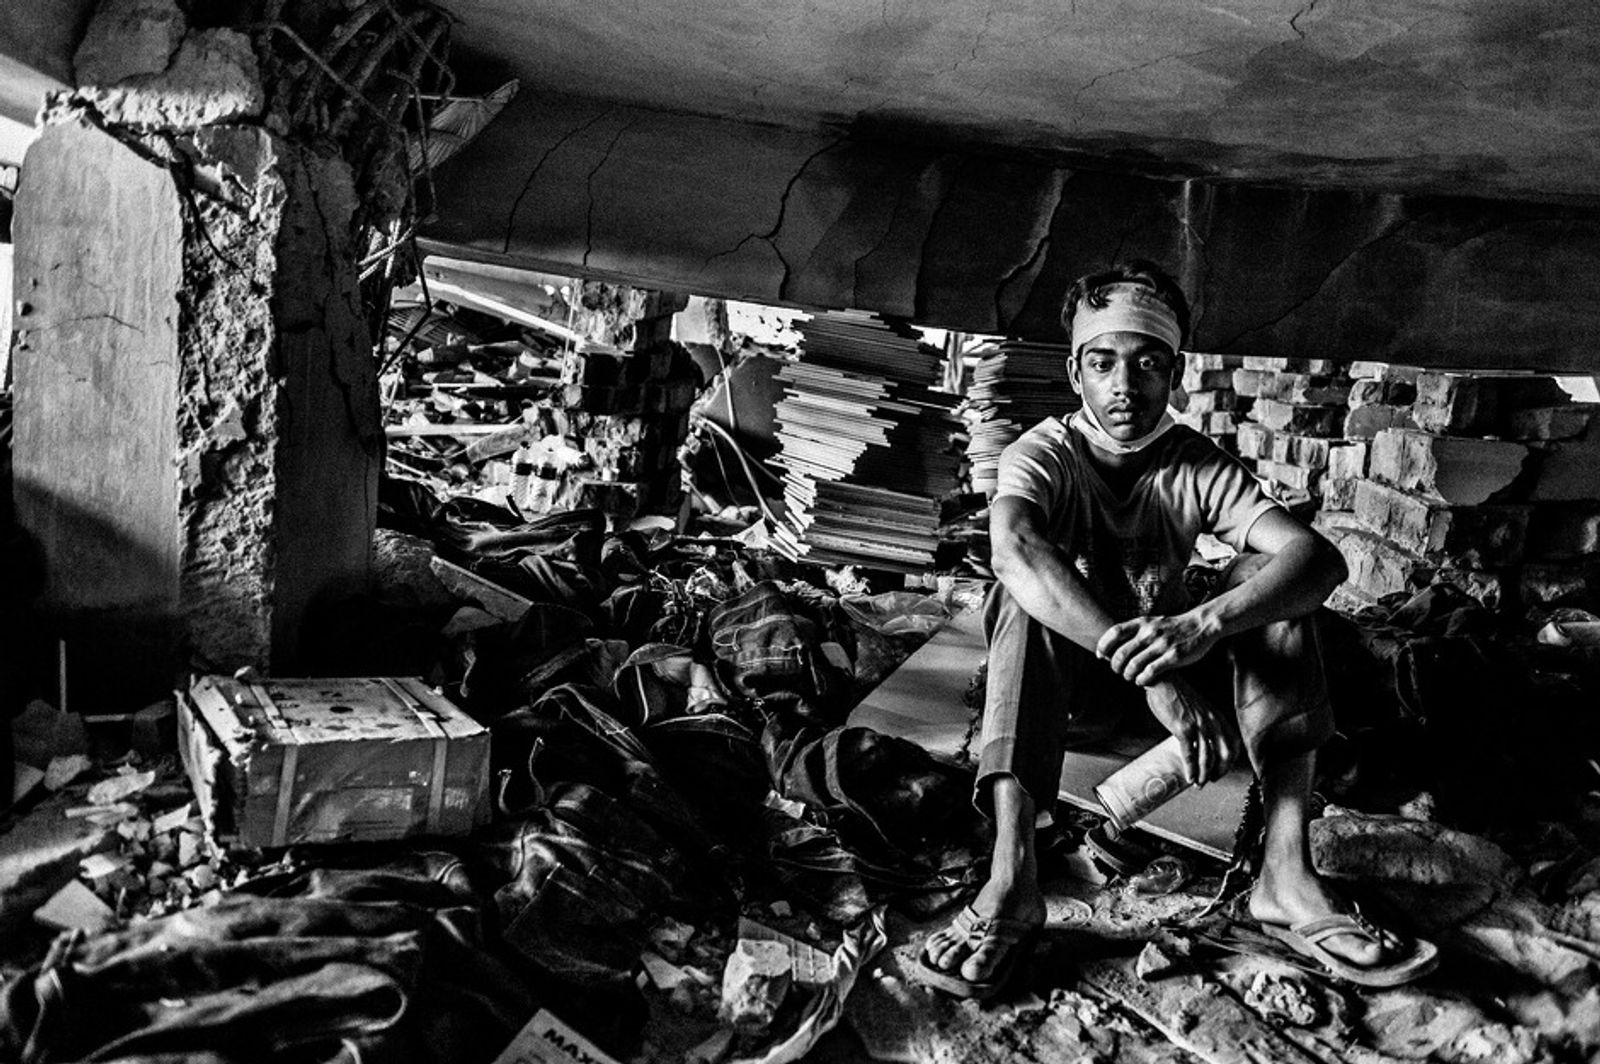 © Rahul Talukder - A tired rescue worker is taking rest during operations in the collapsed building.